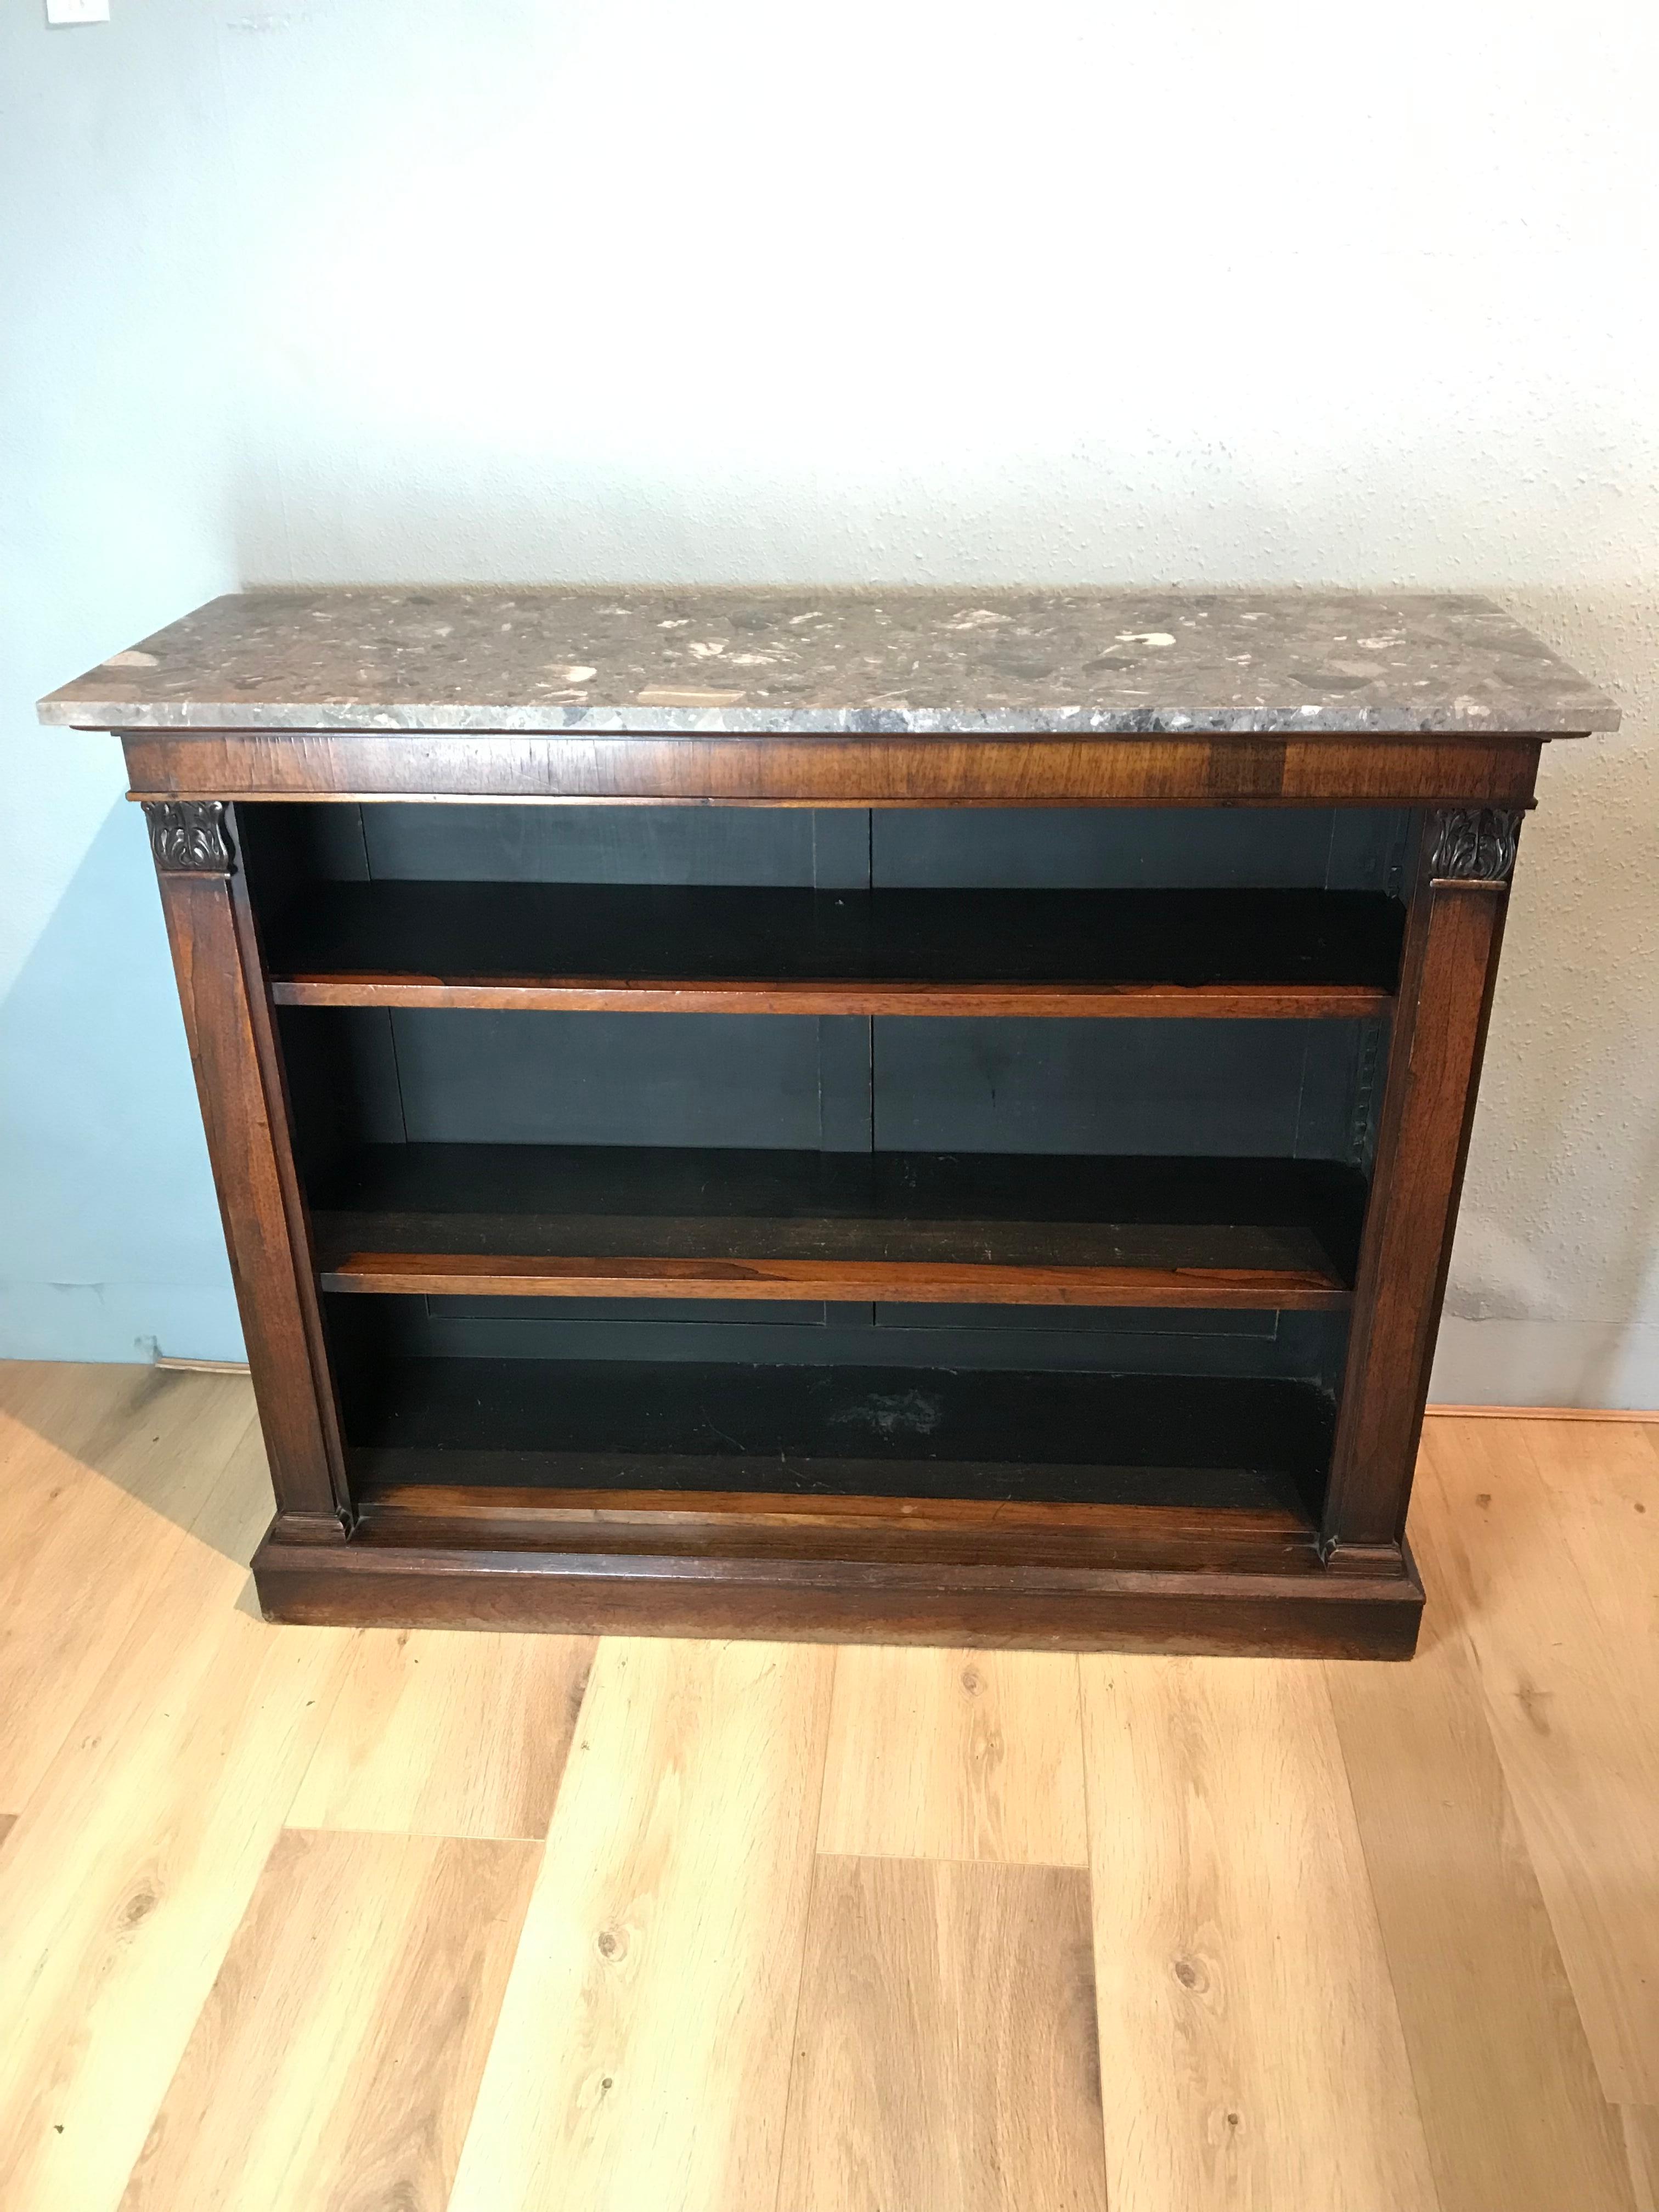 A free standing marble topped William 4th rosewood bookcase. The bookcase consists of two adjustable shelves, flanked by two pillars with carved leaf capitals, resting on a plinth base. This attractive bookcase retains its original patina with